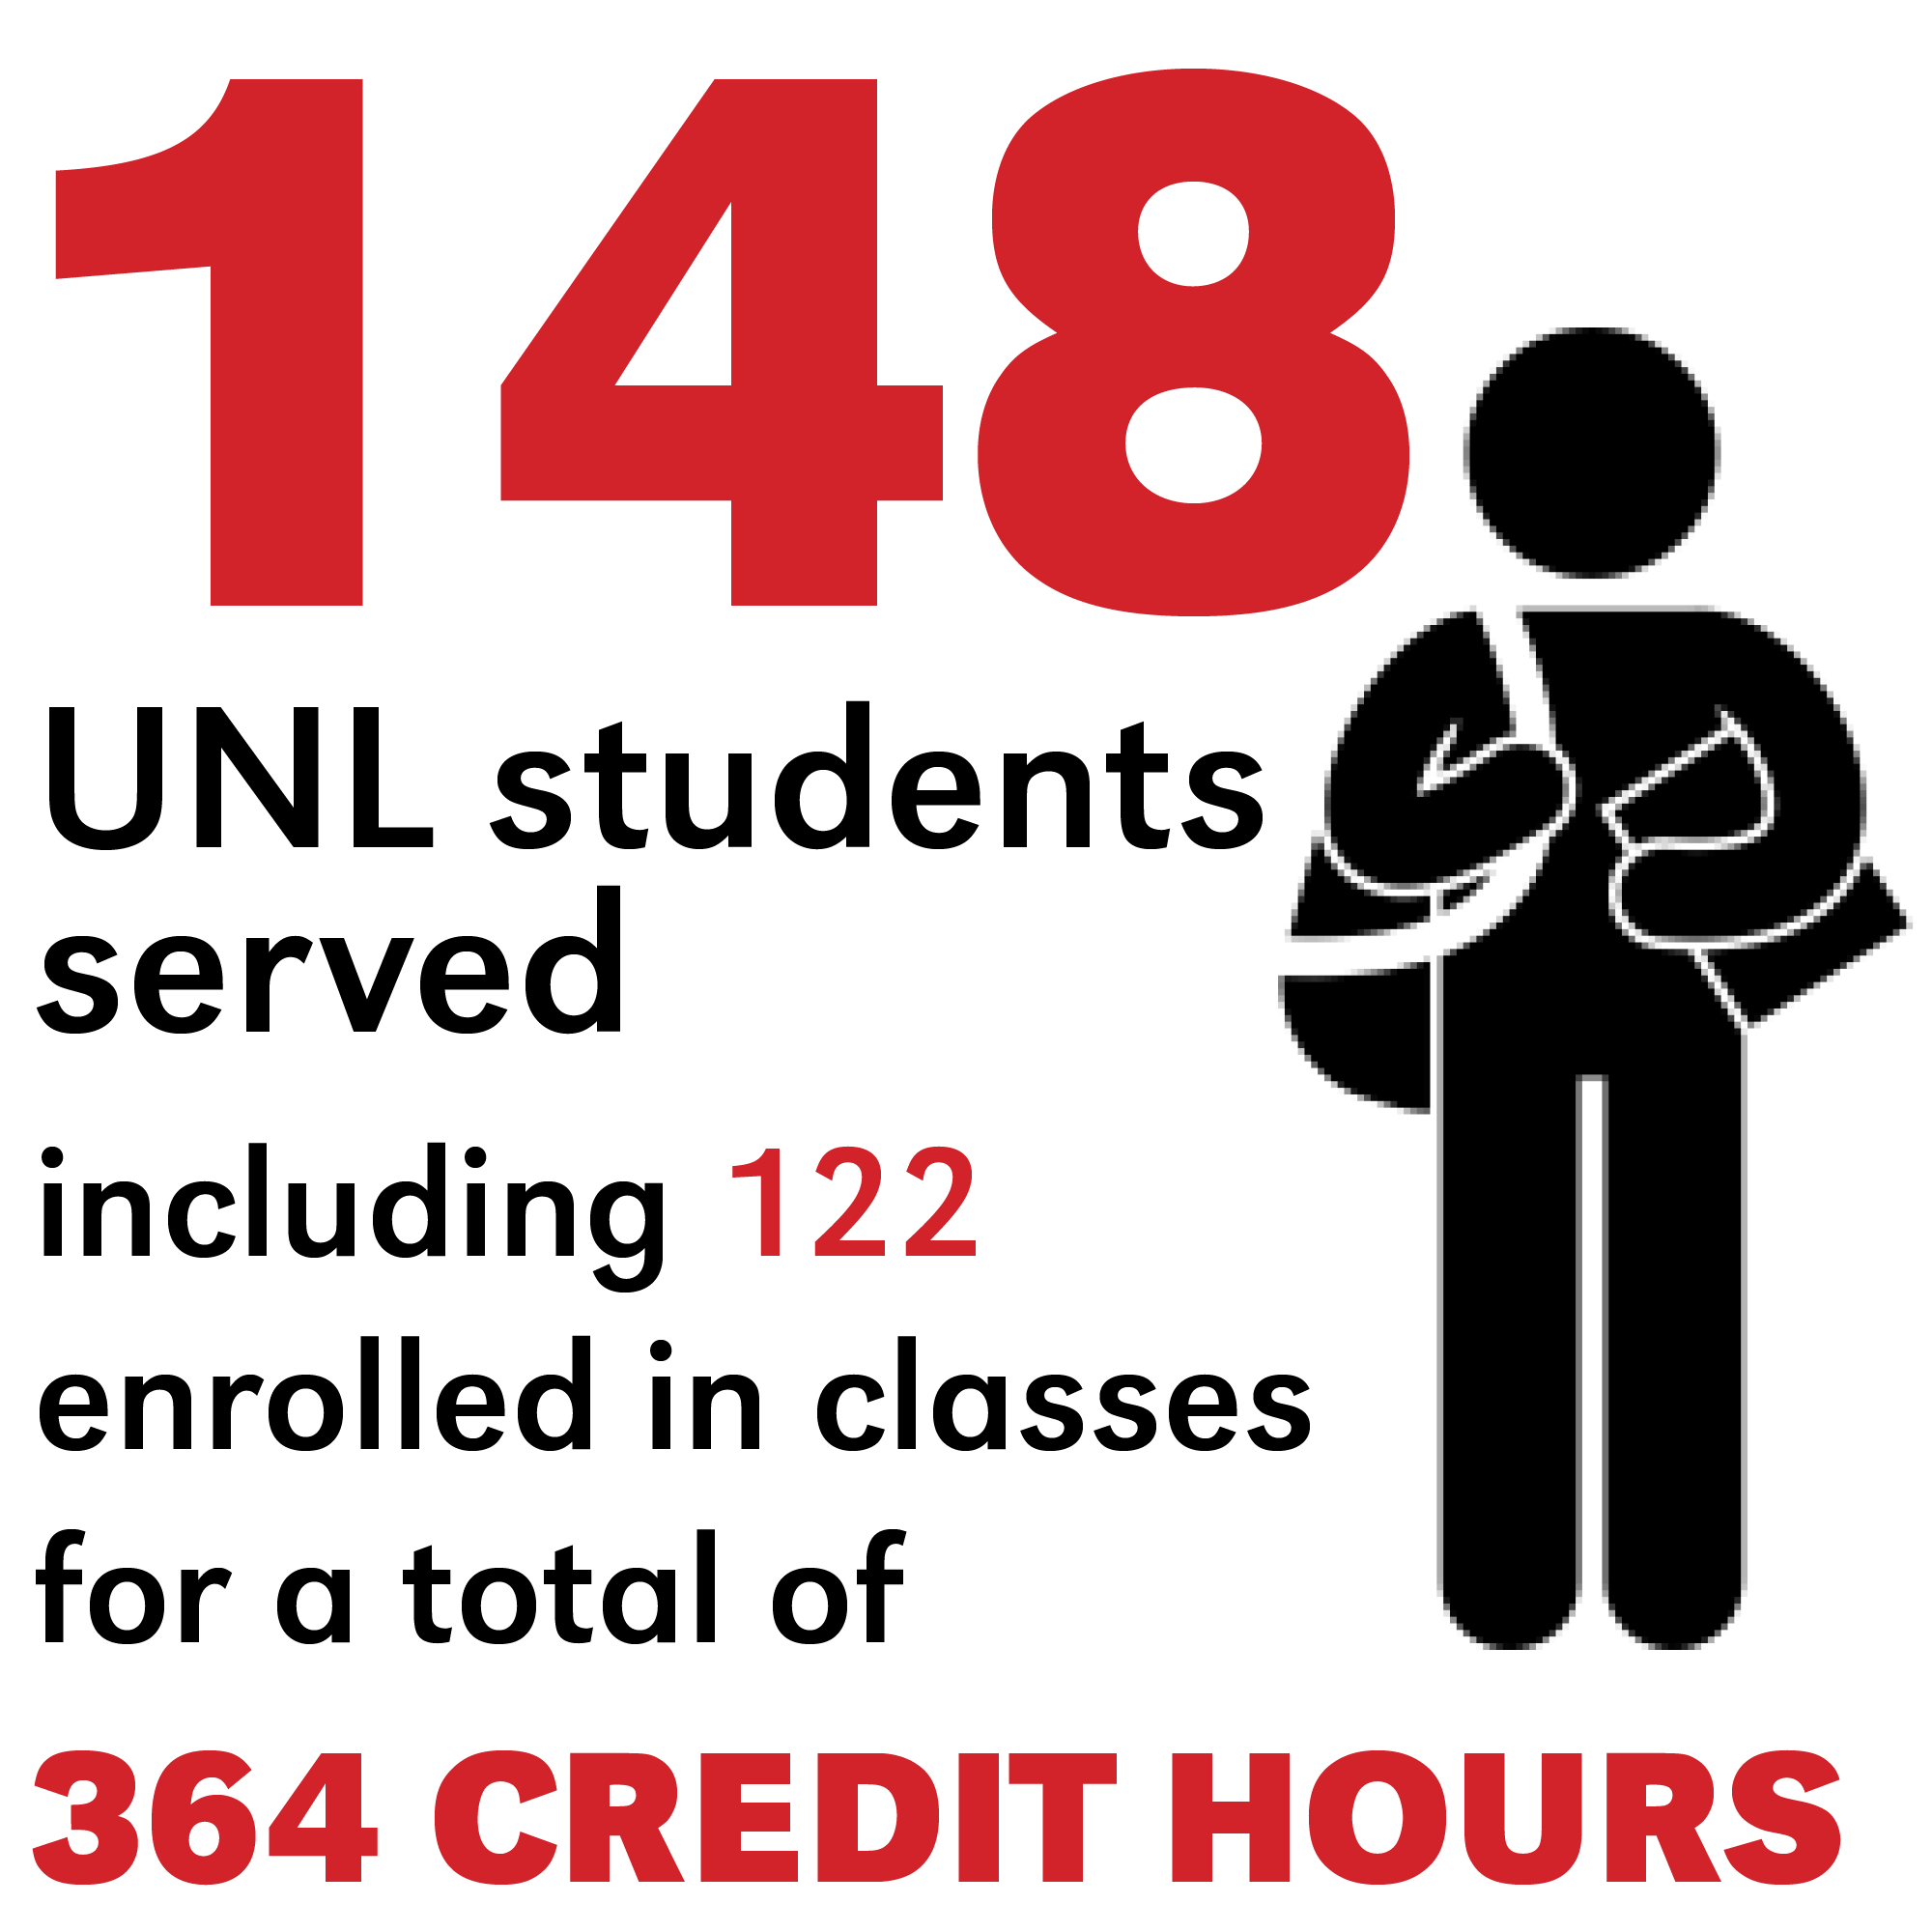 Student Credit Hours